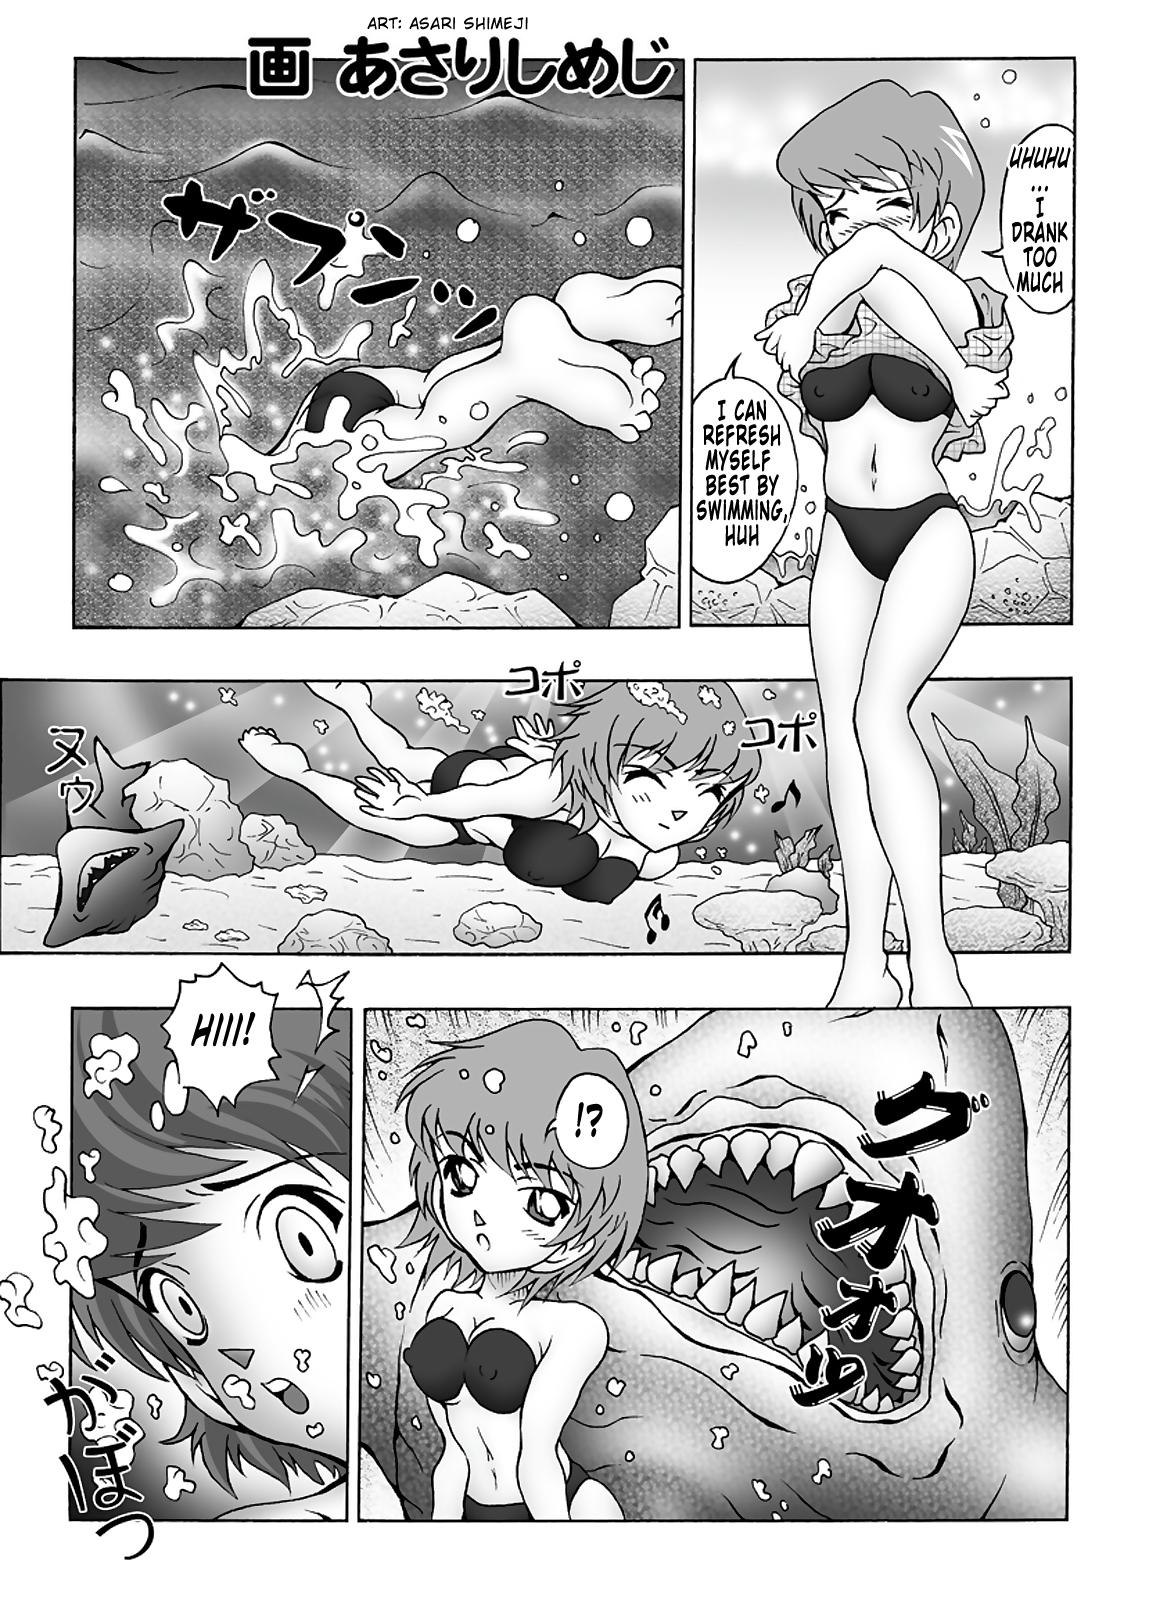 Sexy Girl Bumbling Detective Conan - File 9: The Mystery Of The Jaws Crime - Detective conan Cheating Wife - Page 4